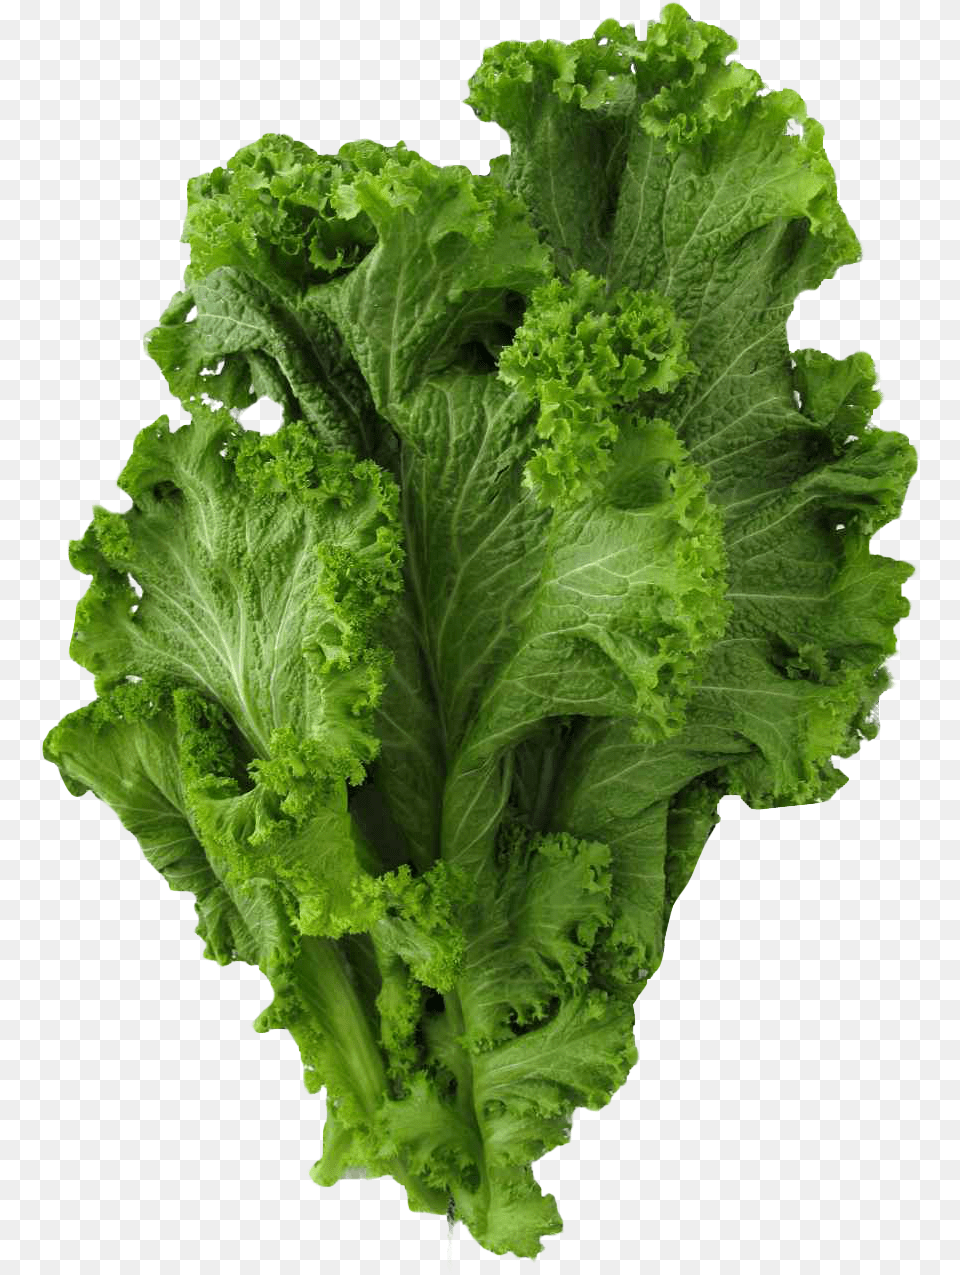 Mustard Greens Greens, Food, Lettuce, Plant, Produce Png Image